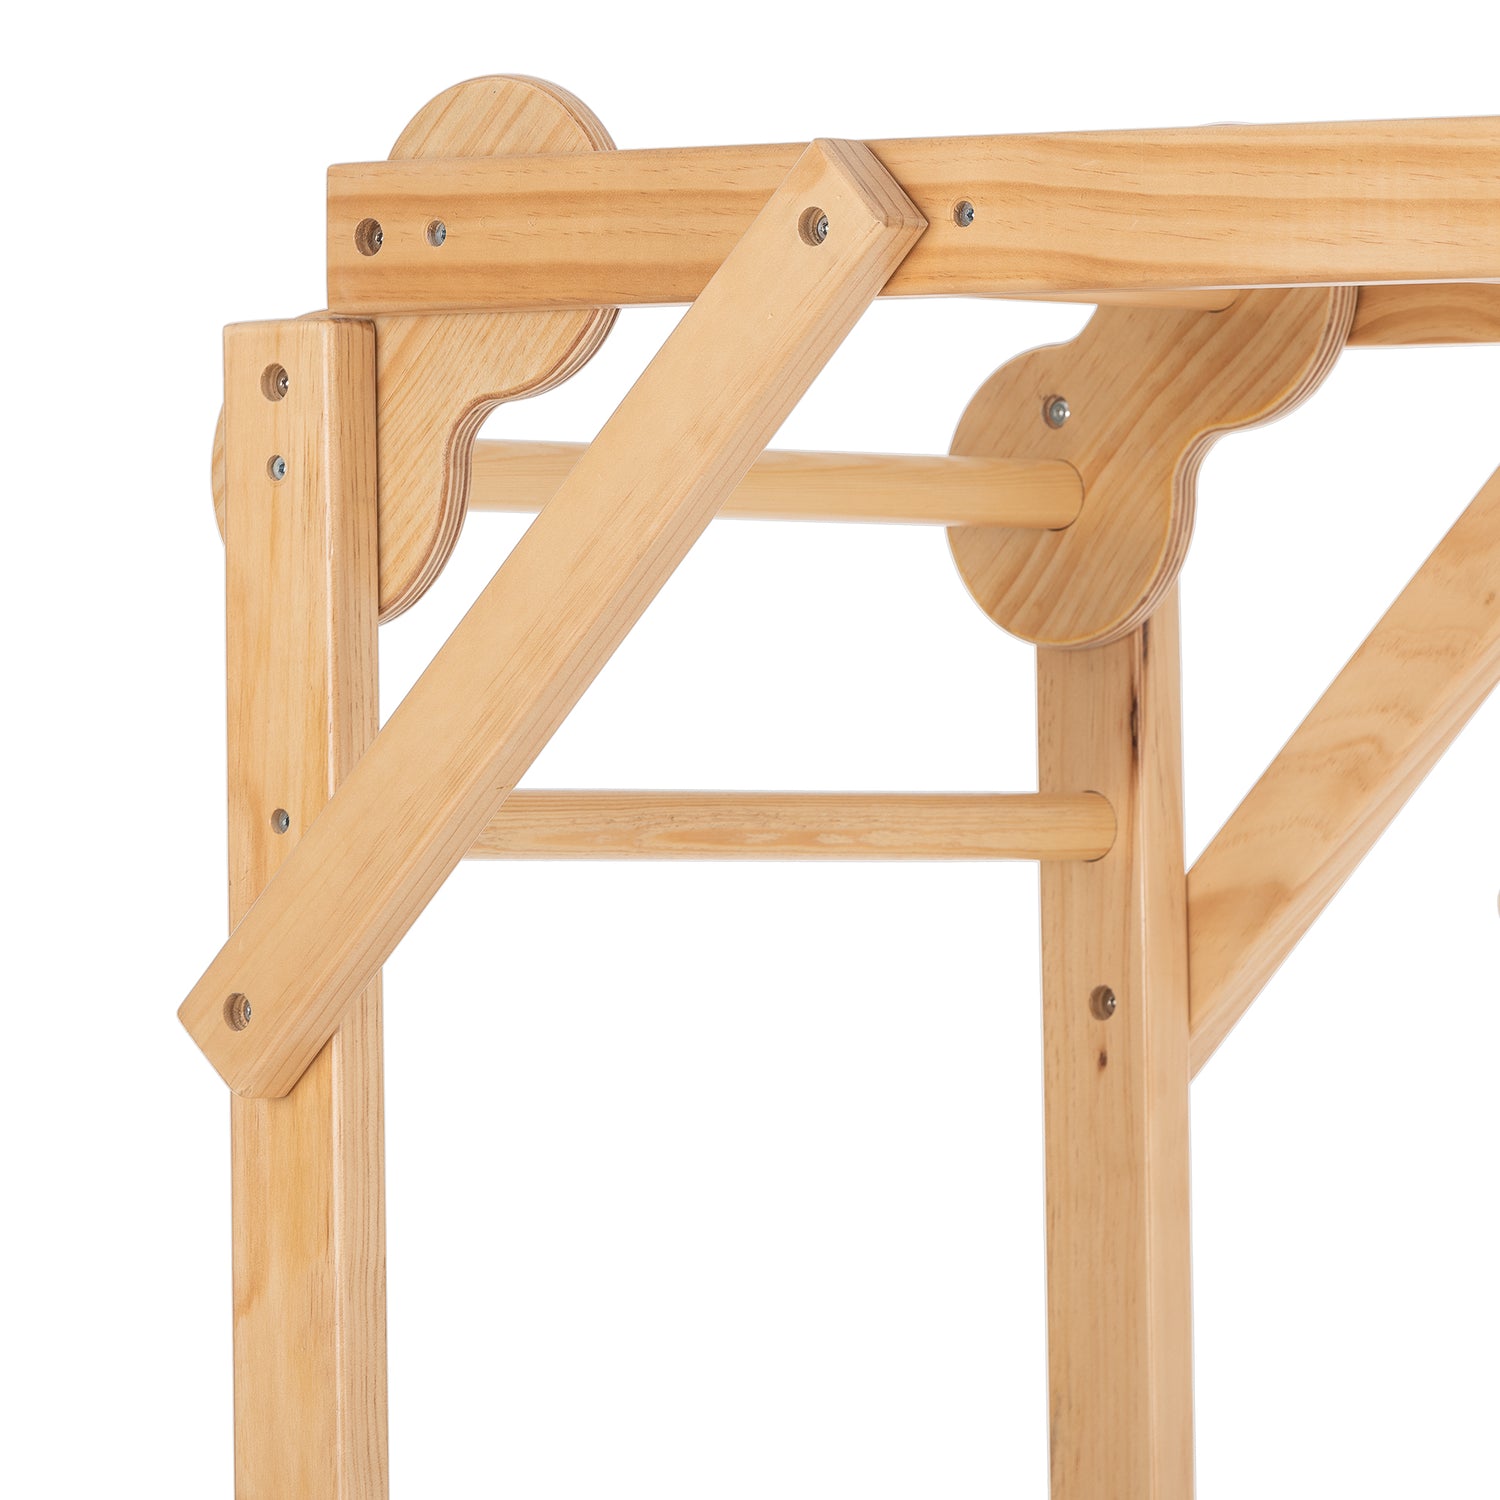 The Grove Jungle Gym - Avenlur's Premium 8 in 1 Wooden Playset for Older Kids in Natural Wood Color - Close Up Detail